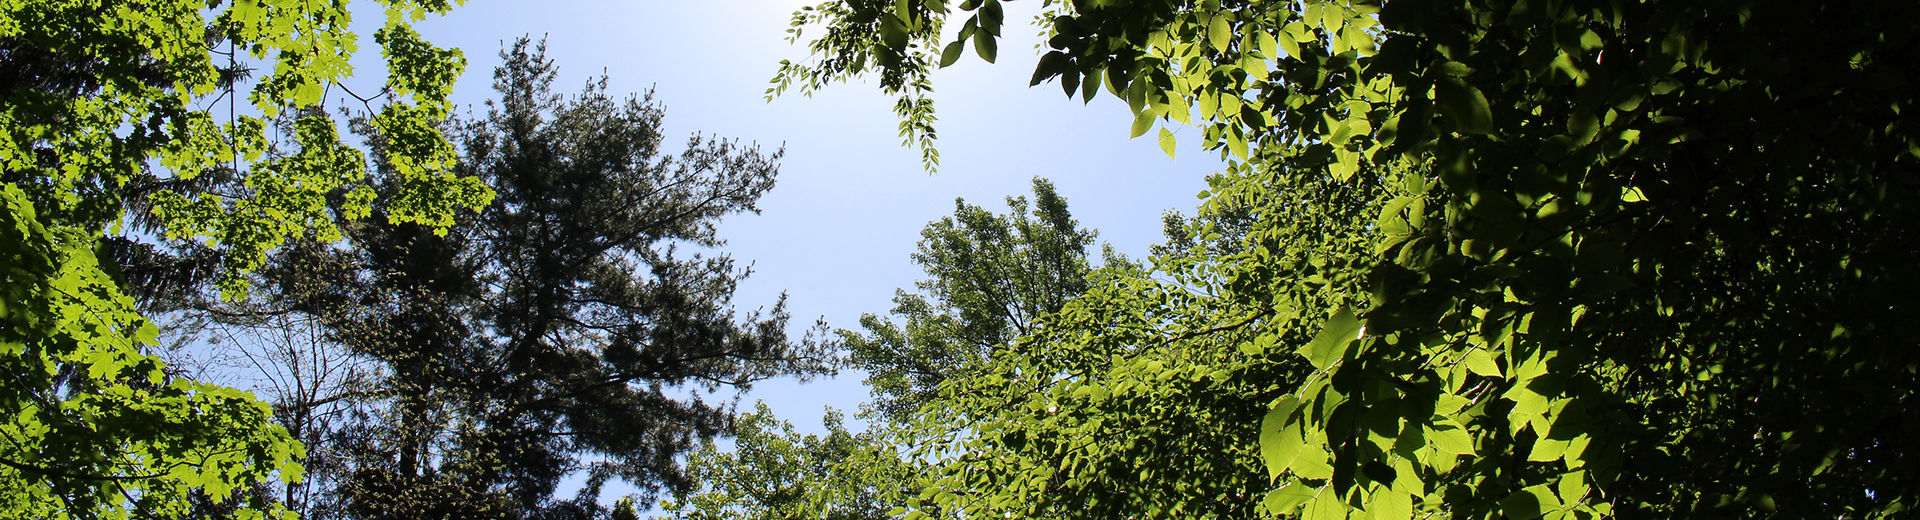 A canopy of trees in the Ambler Arboretum